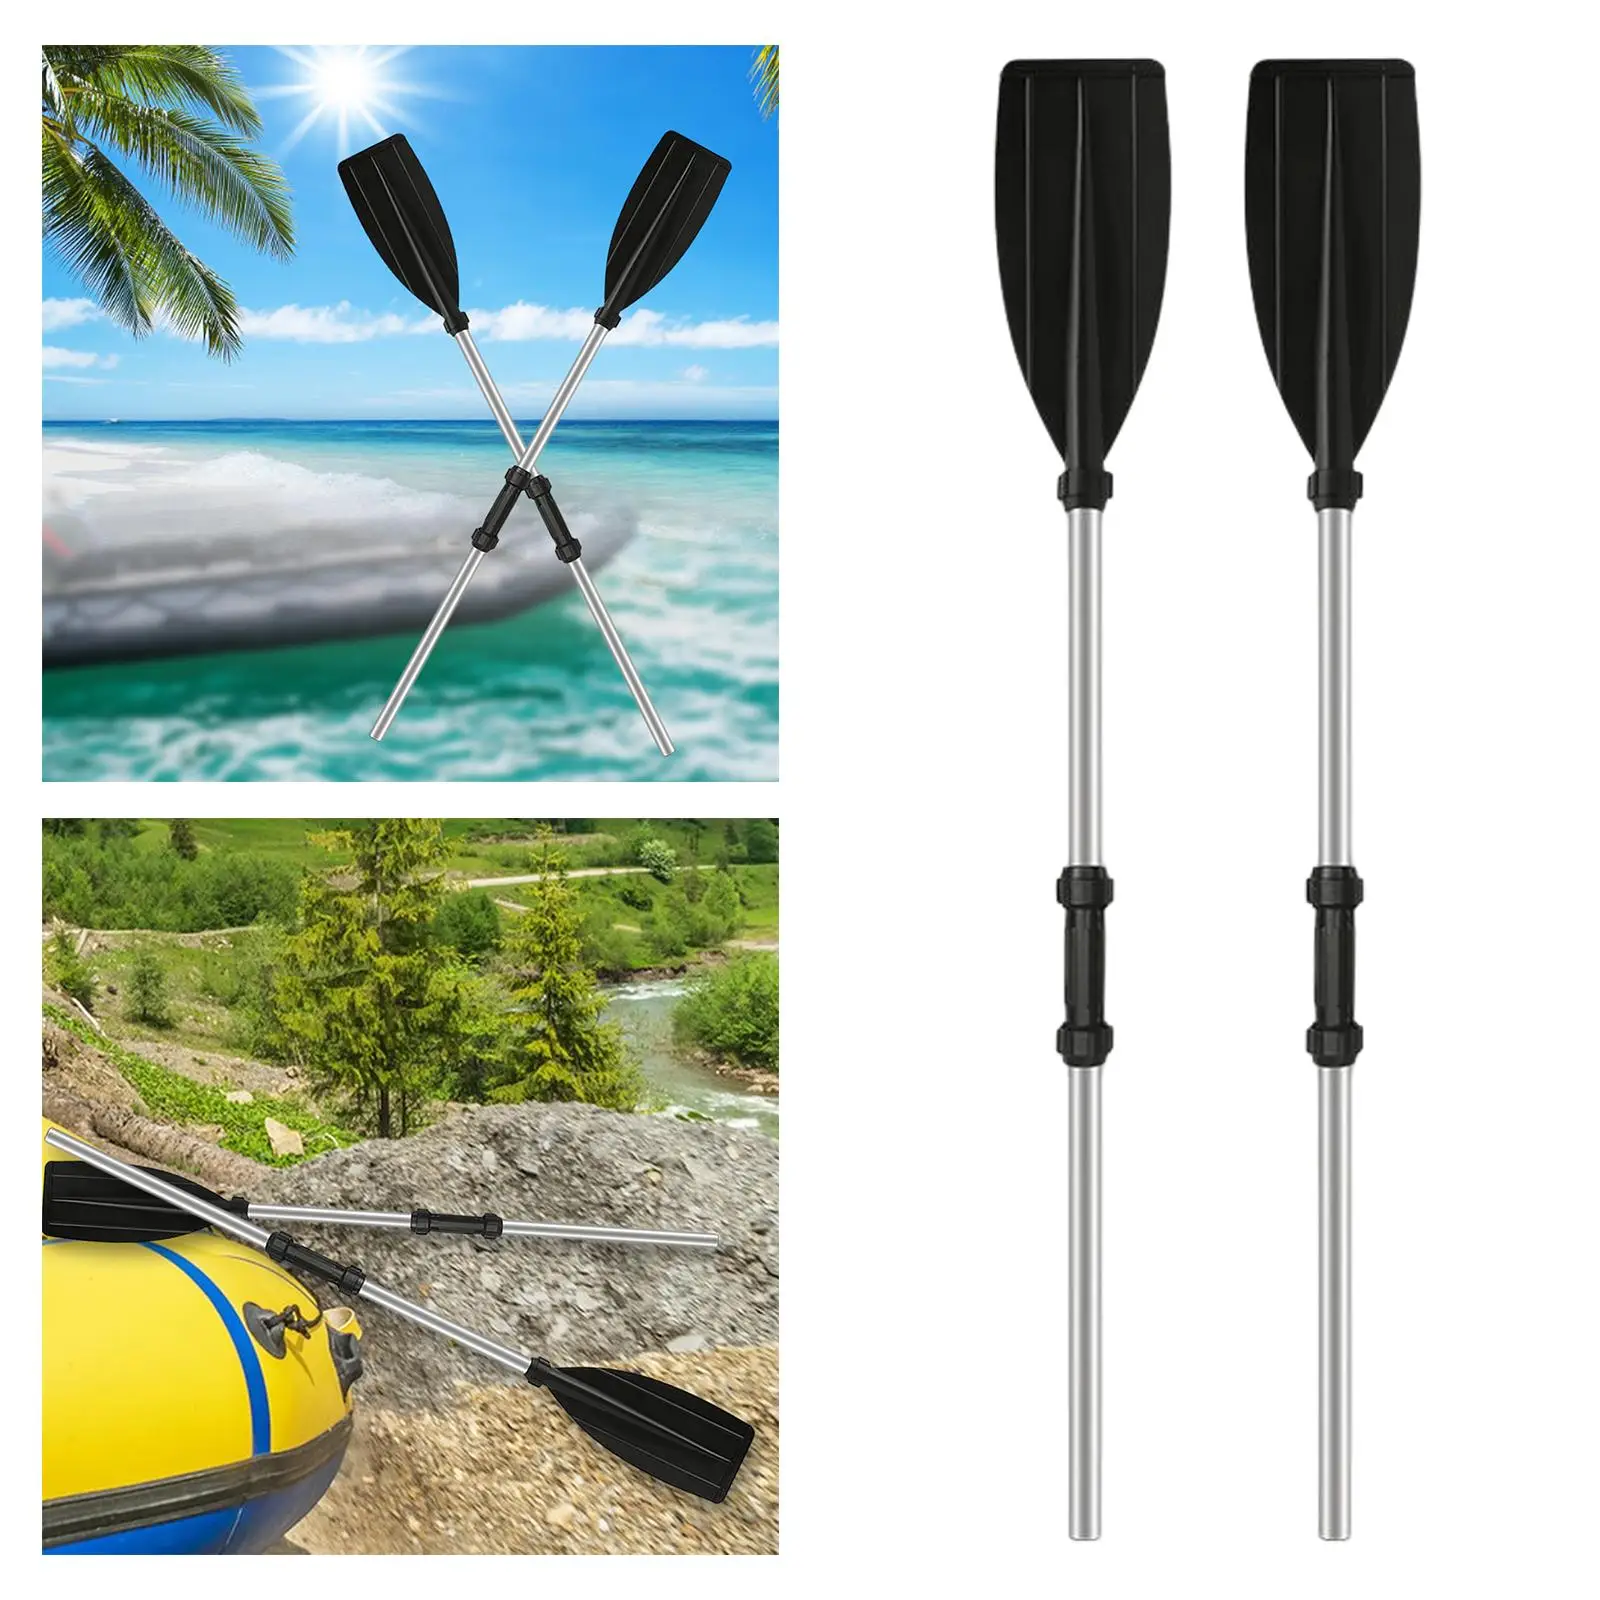 Universal Kayak Boat Rafting Paddle Aluminium Alloy Lightweight Stand up Paddle Board for Outside Activities Rafting Fitting